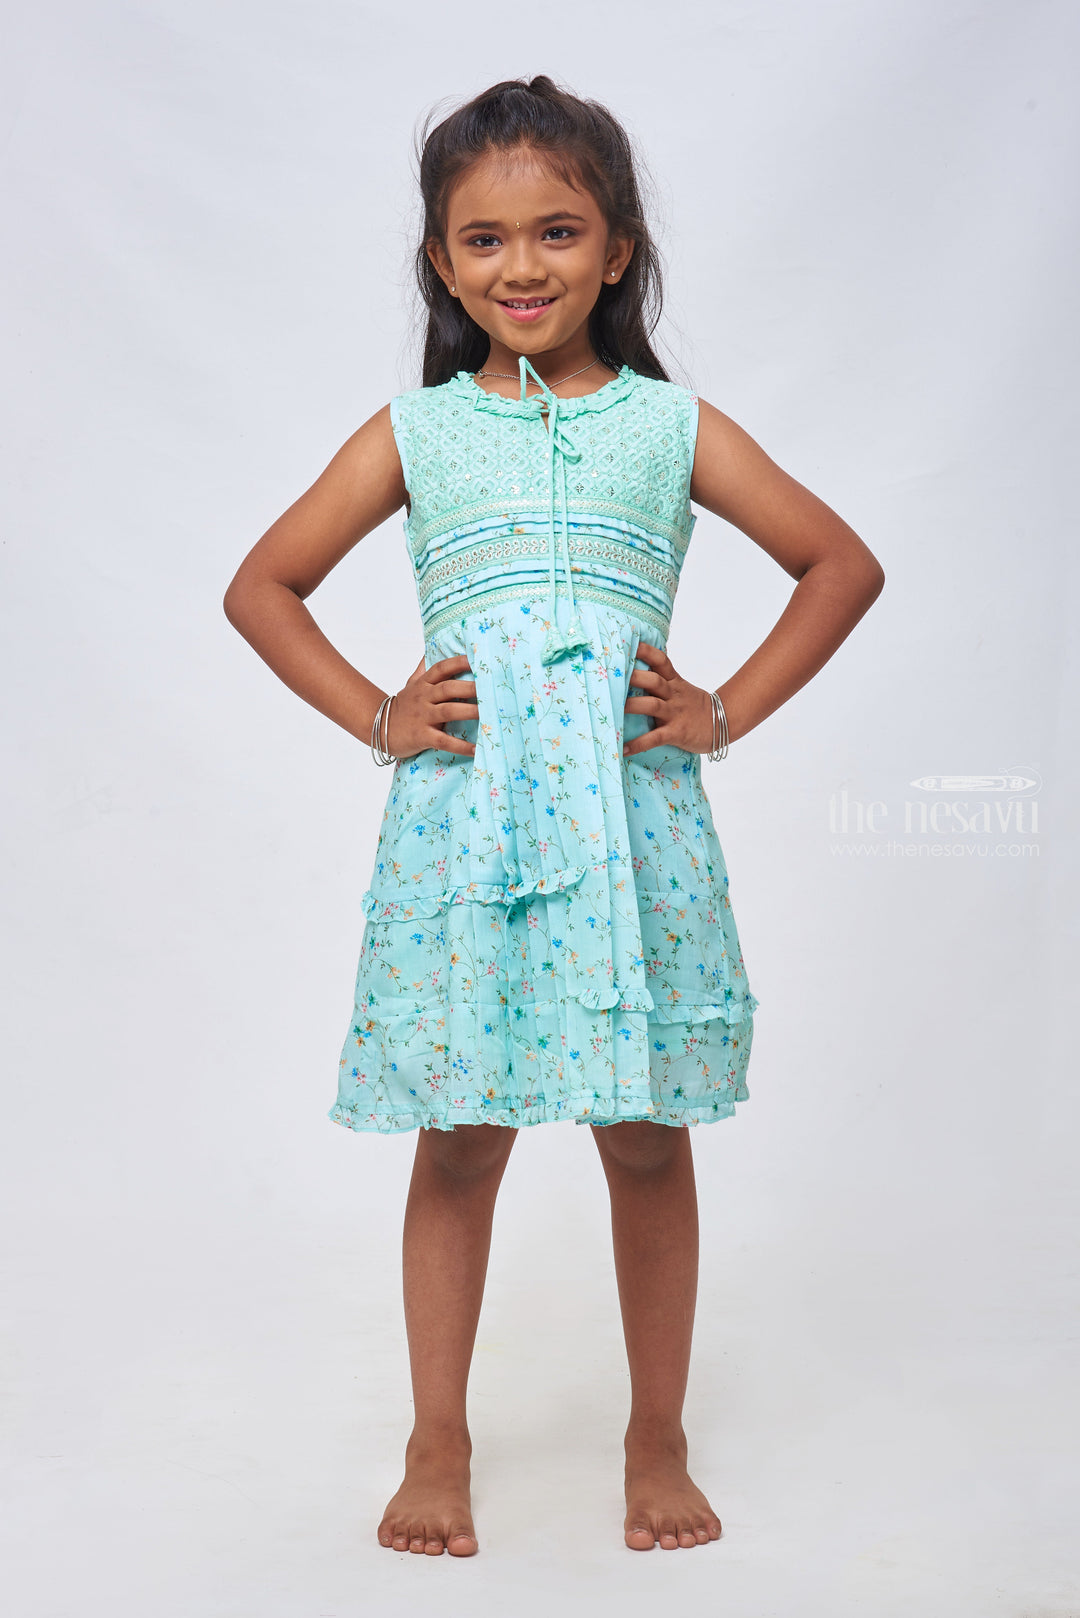 The Nesavu Girls Cotton Frock Blue Bling: Sequin Embroidered Floral Printed Pleated Blue Cotton Frock for Girls Nesavu 22 (4Y) / Blue / Cotton GFC1156B-22 Chic & Trendy: Discover Beautiful Cotton Frocks for Baby Girls